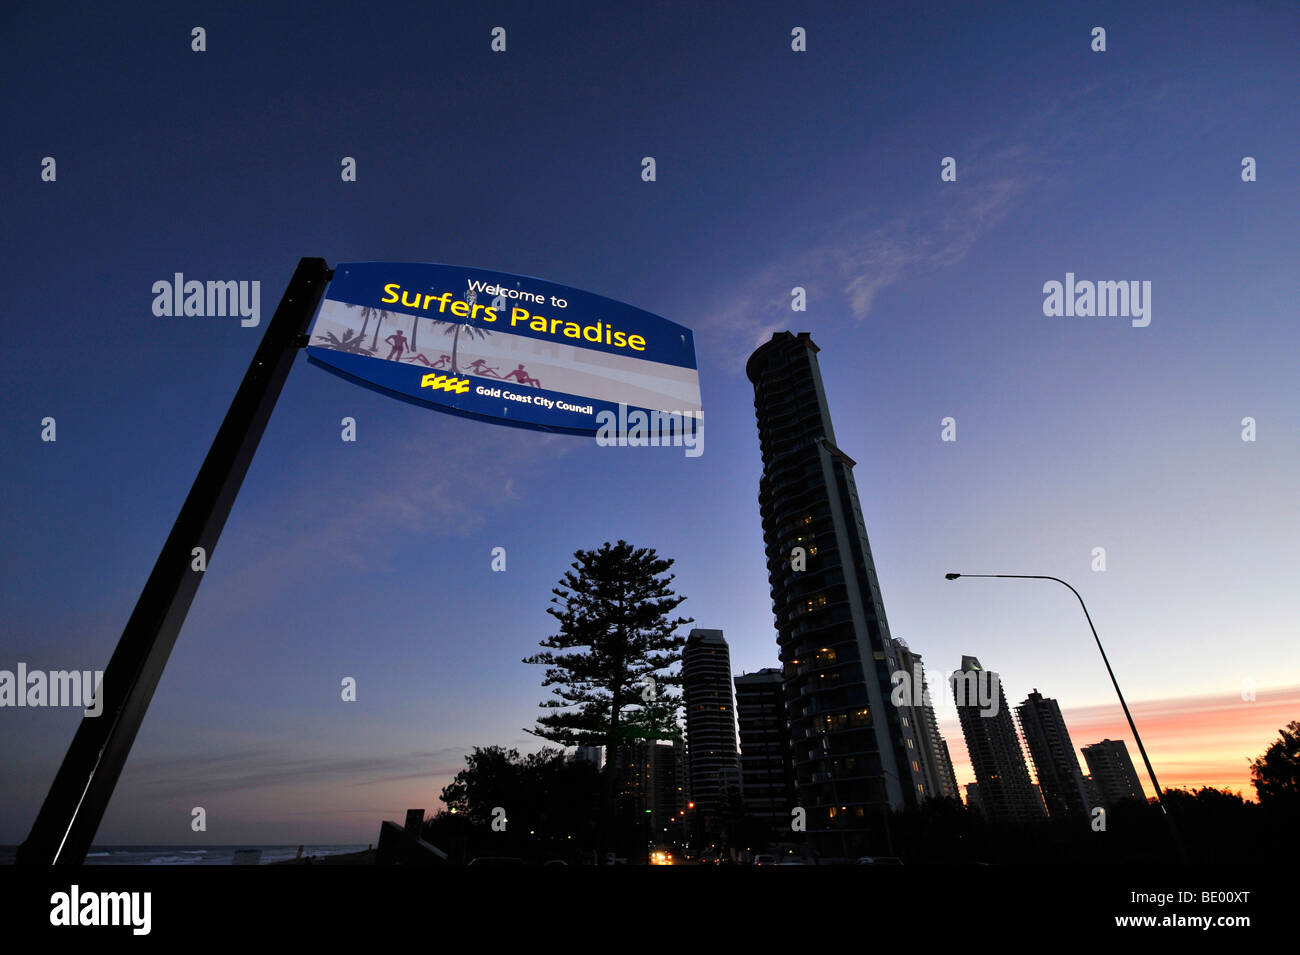 Welcome sign, skyscrapers, night shot, Surfers Paradise, Gold Coast, New South Wales, Australia Stock Photo